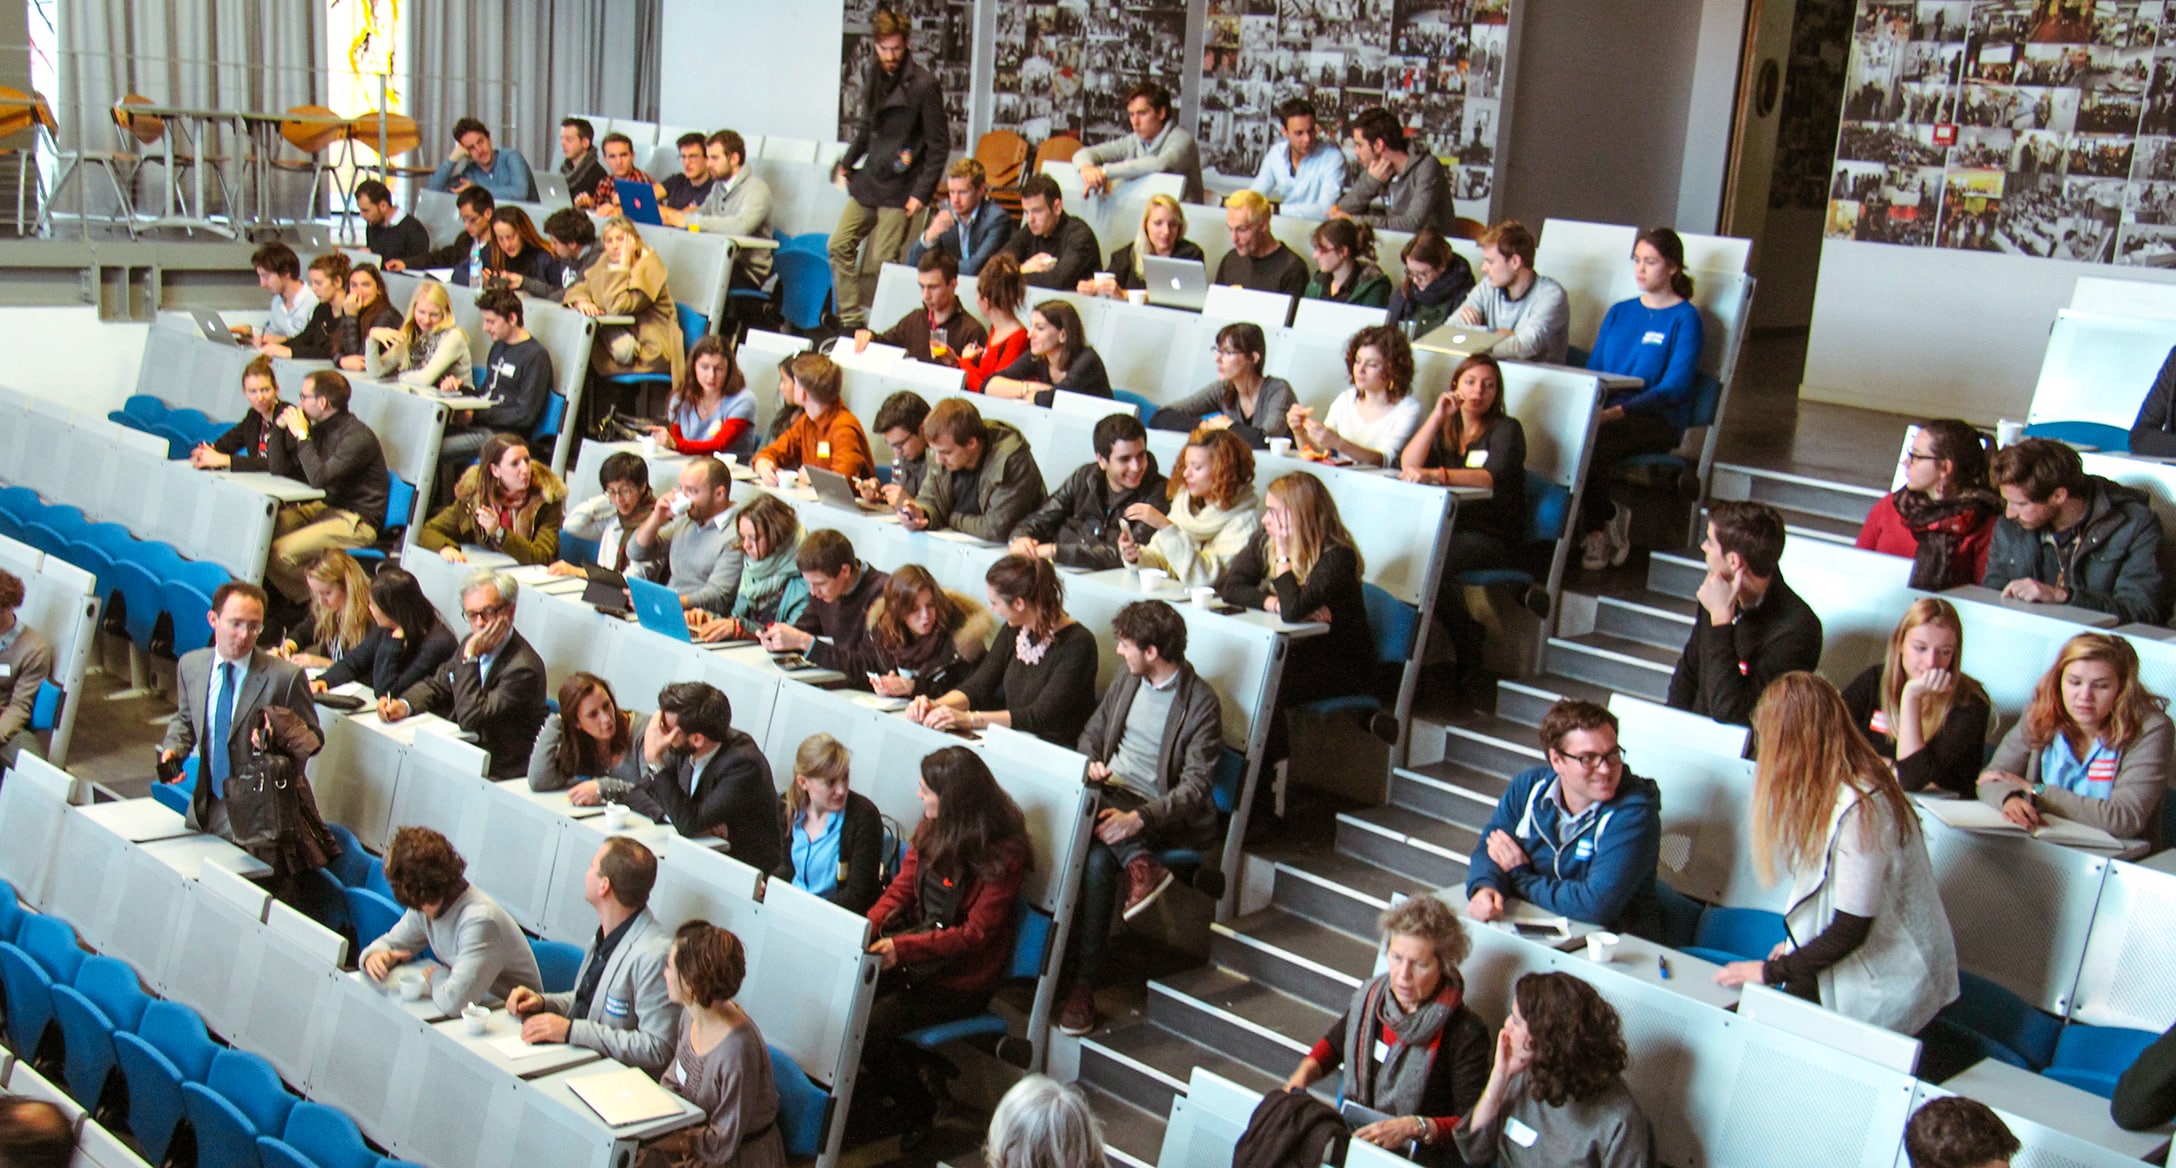 Students in a lecture hall in university